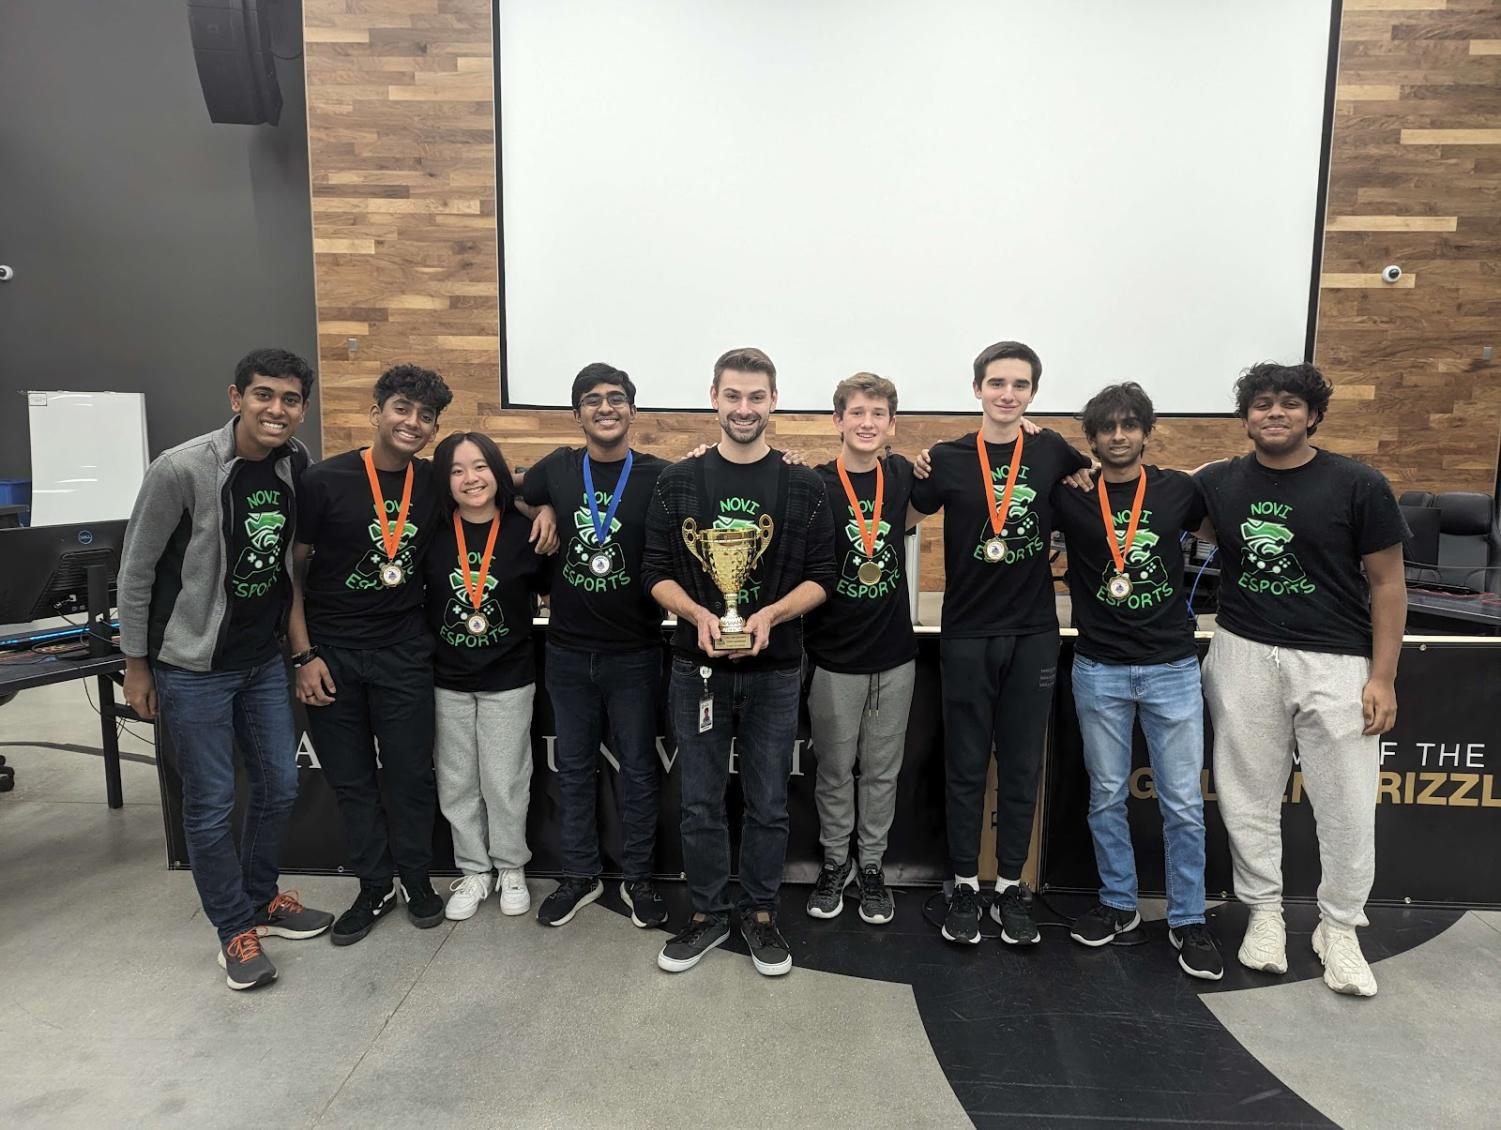 The League of Legends team celebrates their state finals victory in the fall season with some of the Smash Bros Green team. December 10th, 2022, Oakland University. From left to right: Rishi Tappeta, William Diaz, Julia Lin, Kavin Kukunoor, Christopher White, Conner Kirkman, Robert Floros, Nihal Dongari, Pranav Chinniah. Picture provided by Mr. White.